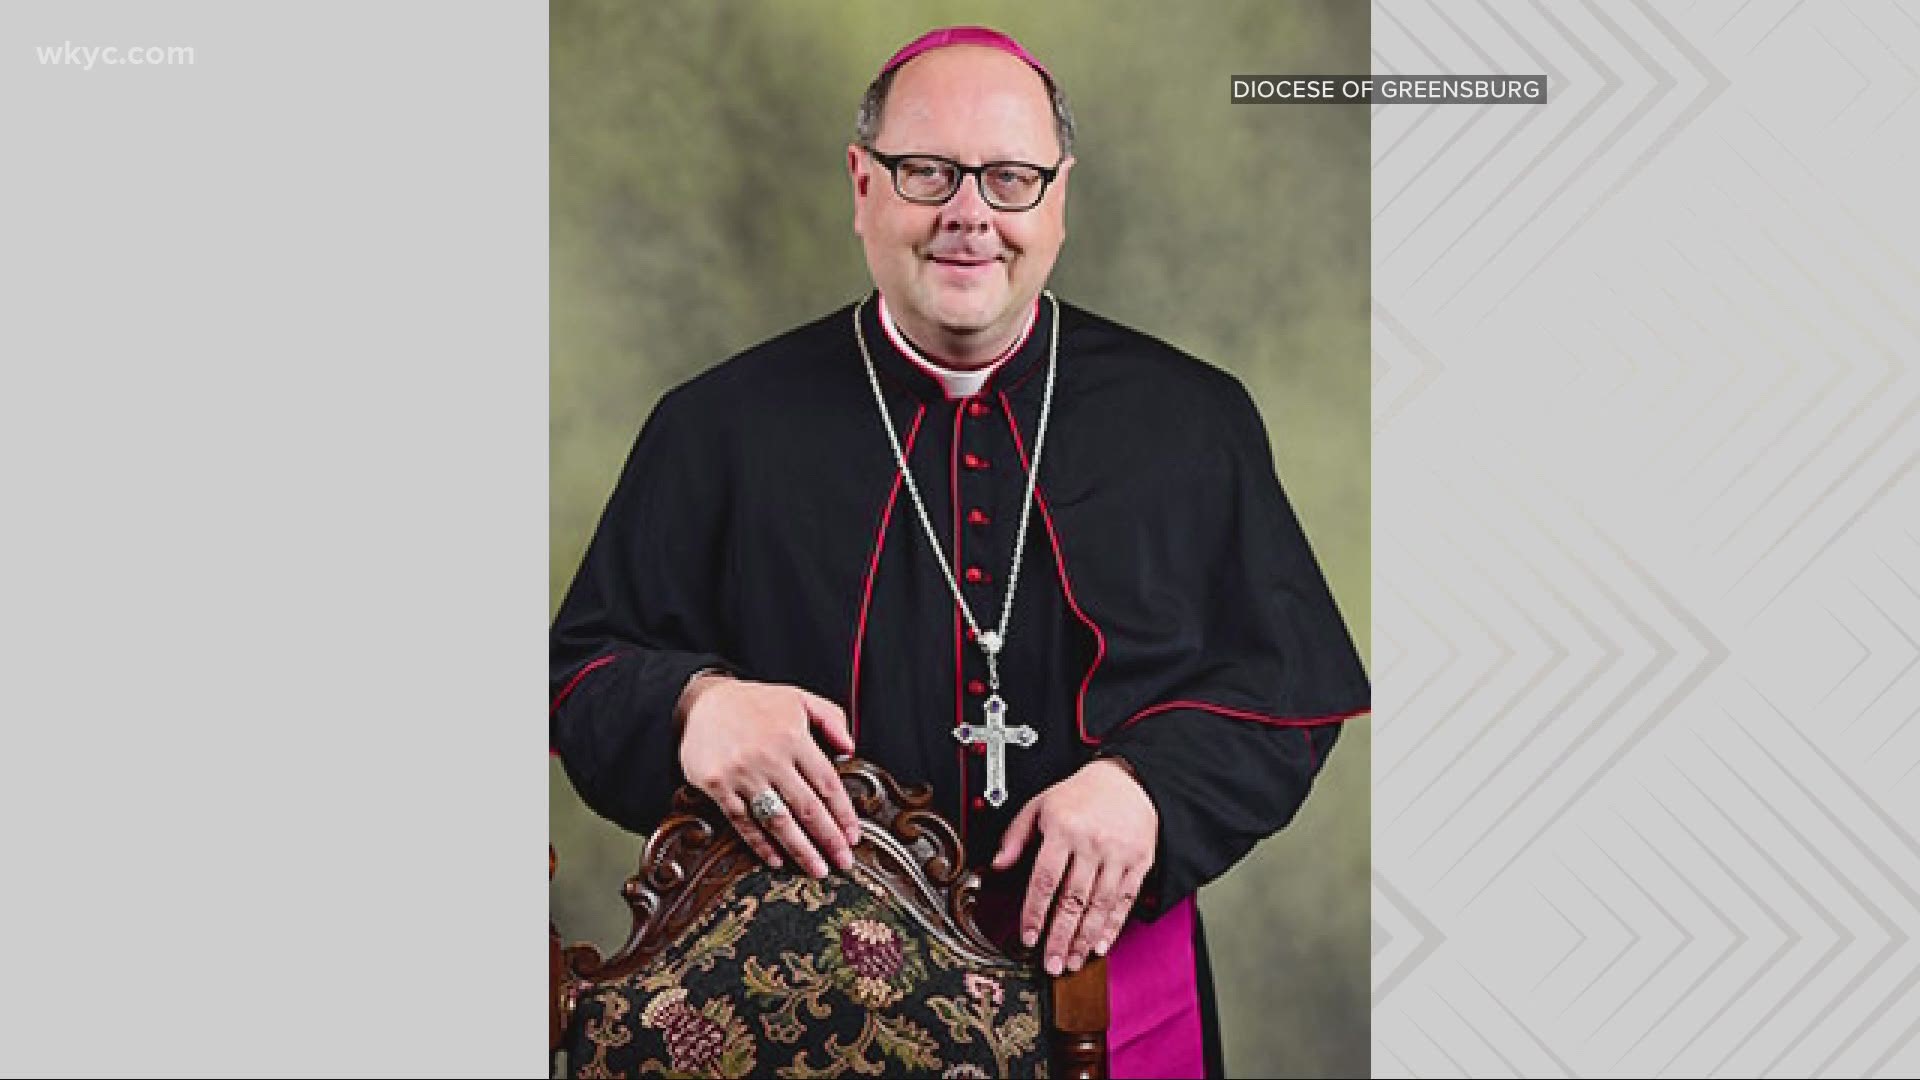 Edward C. Malesic introduced as new Bishop of Cleveland's Roman Catholic Diocese. Brandon Simmons tells us more.